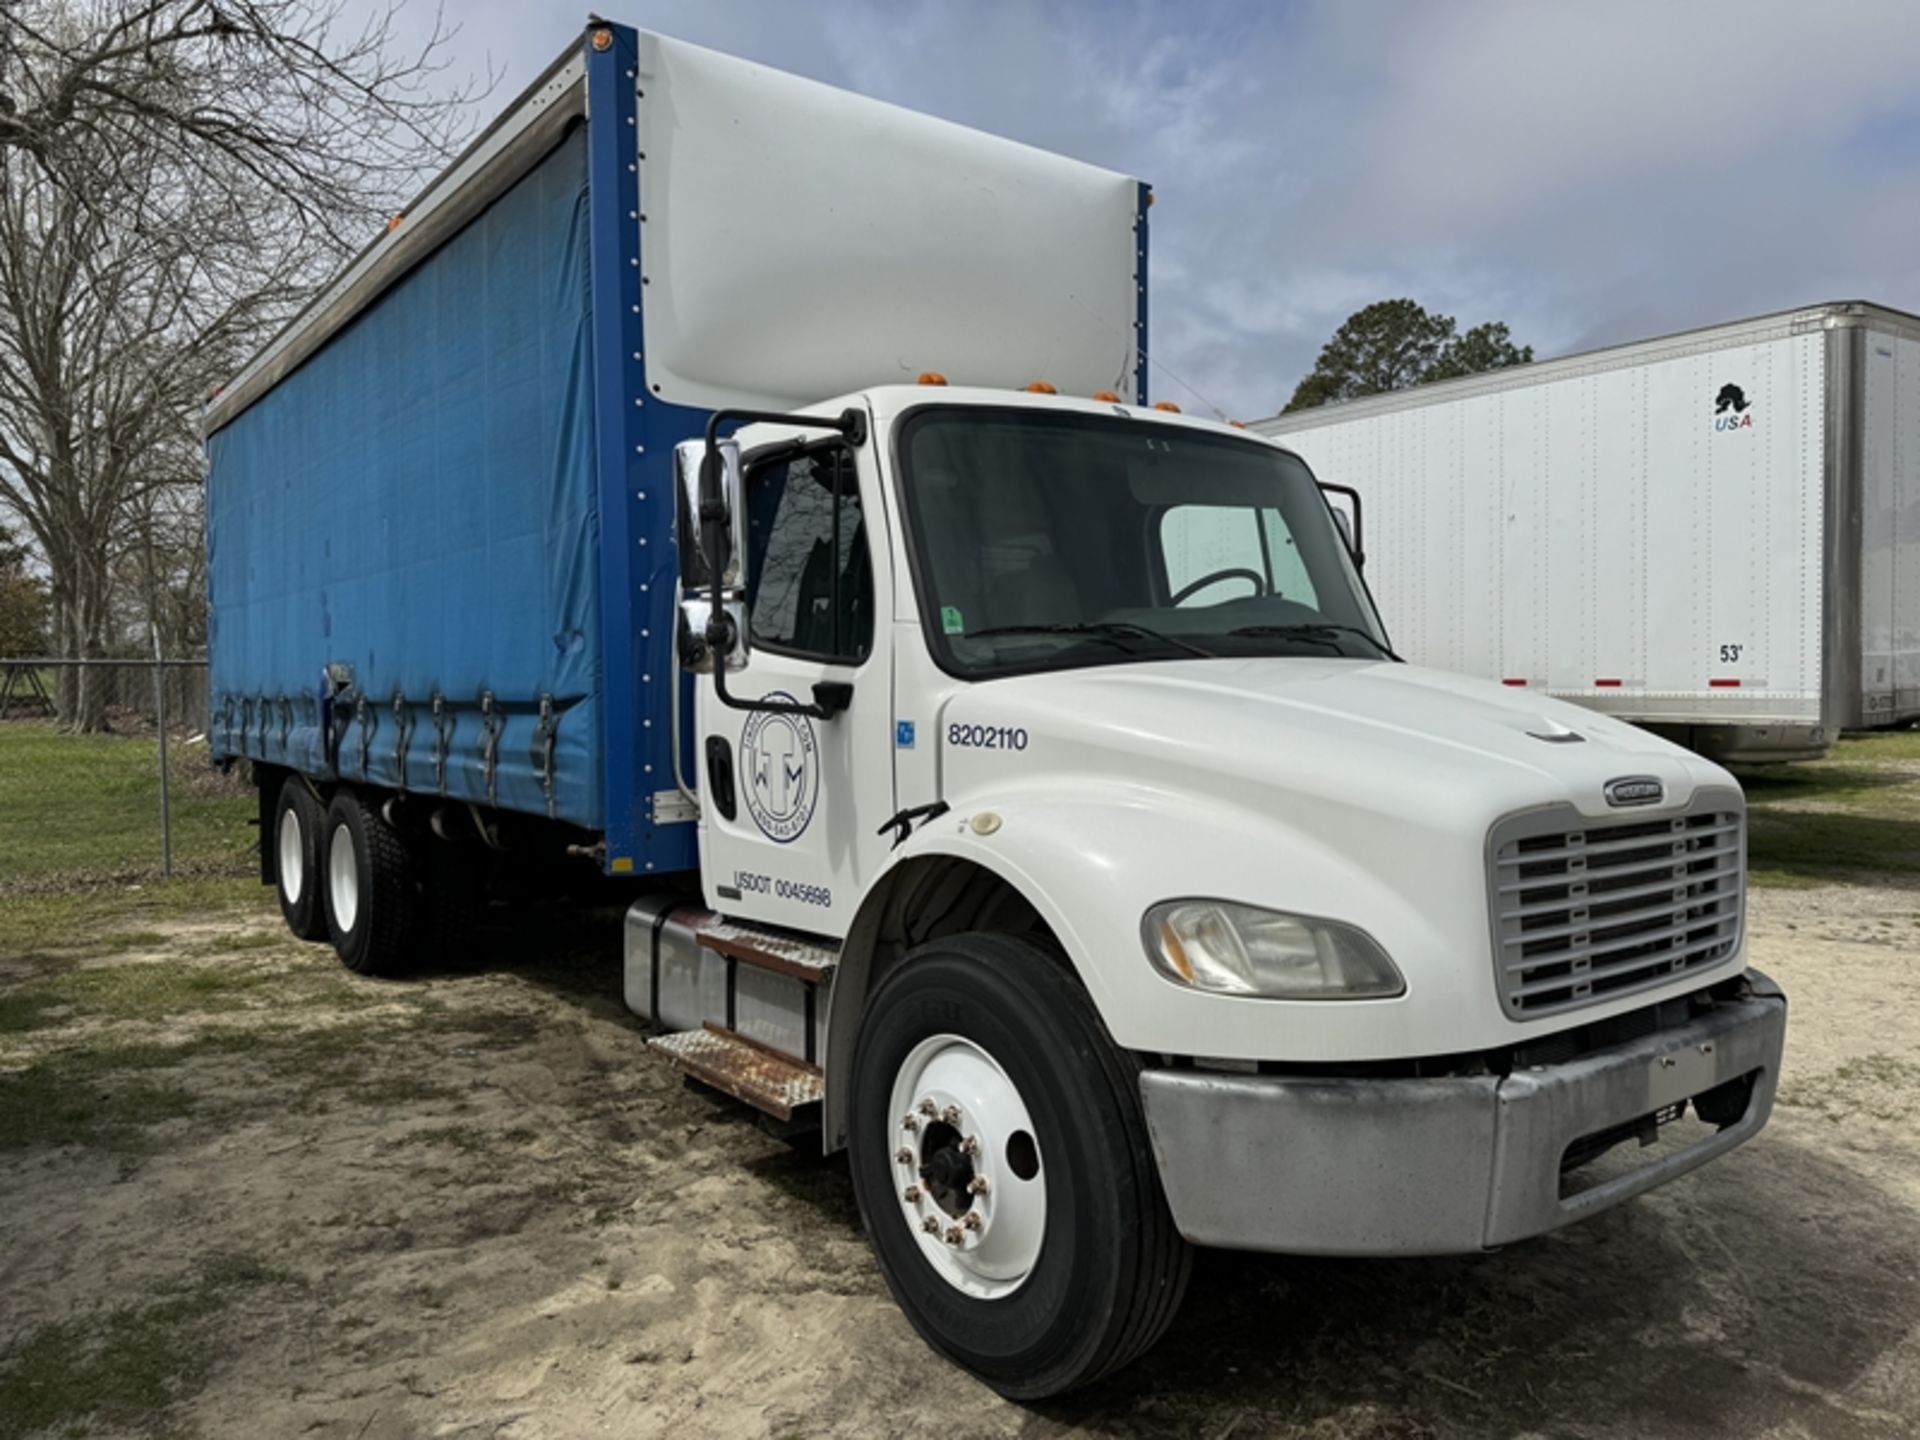 2006 FREIGHTLINER 24' curtain body truck tandem axle, CAT dsl, 9spd - 312,920 miles showing - - Image 2 of 7